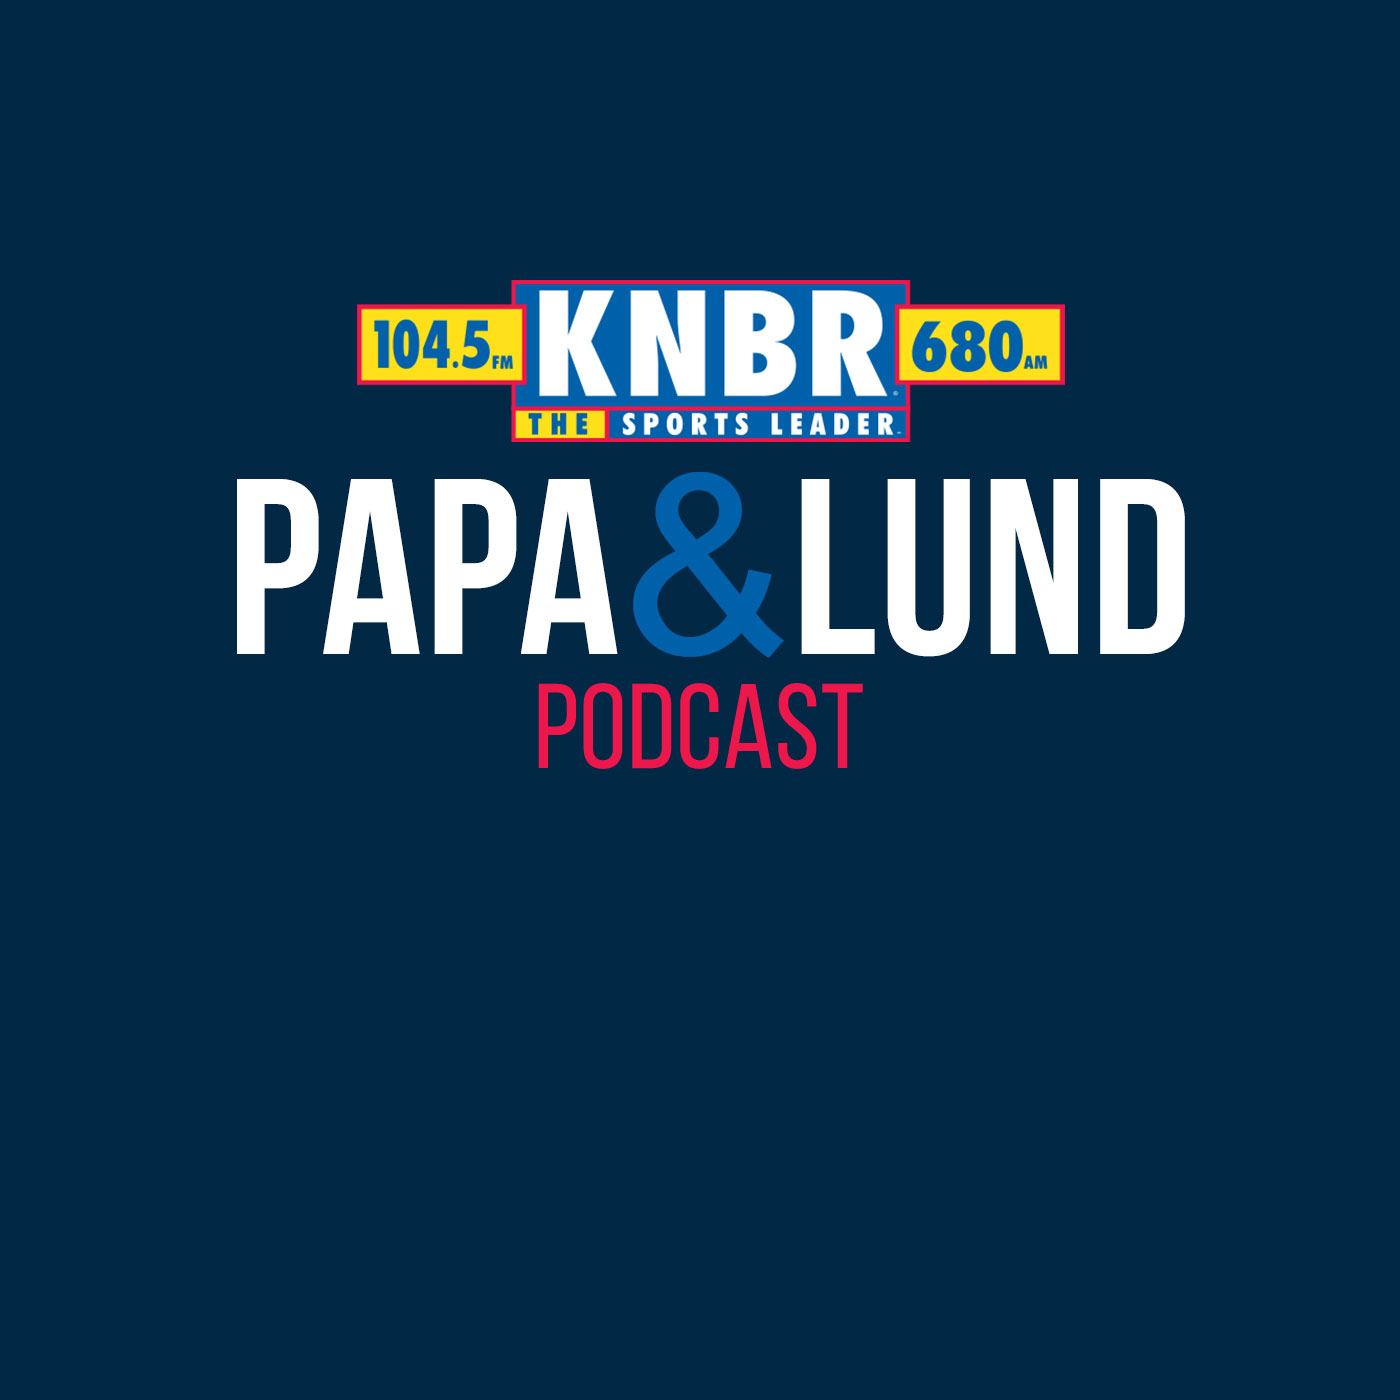 4-28 Steve Wyche joins Papa & Lund to break down the first round of the NFL Draft and what moves make occur moving forward in the Draft